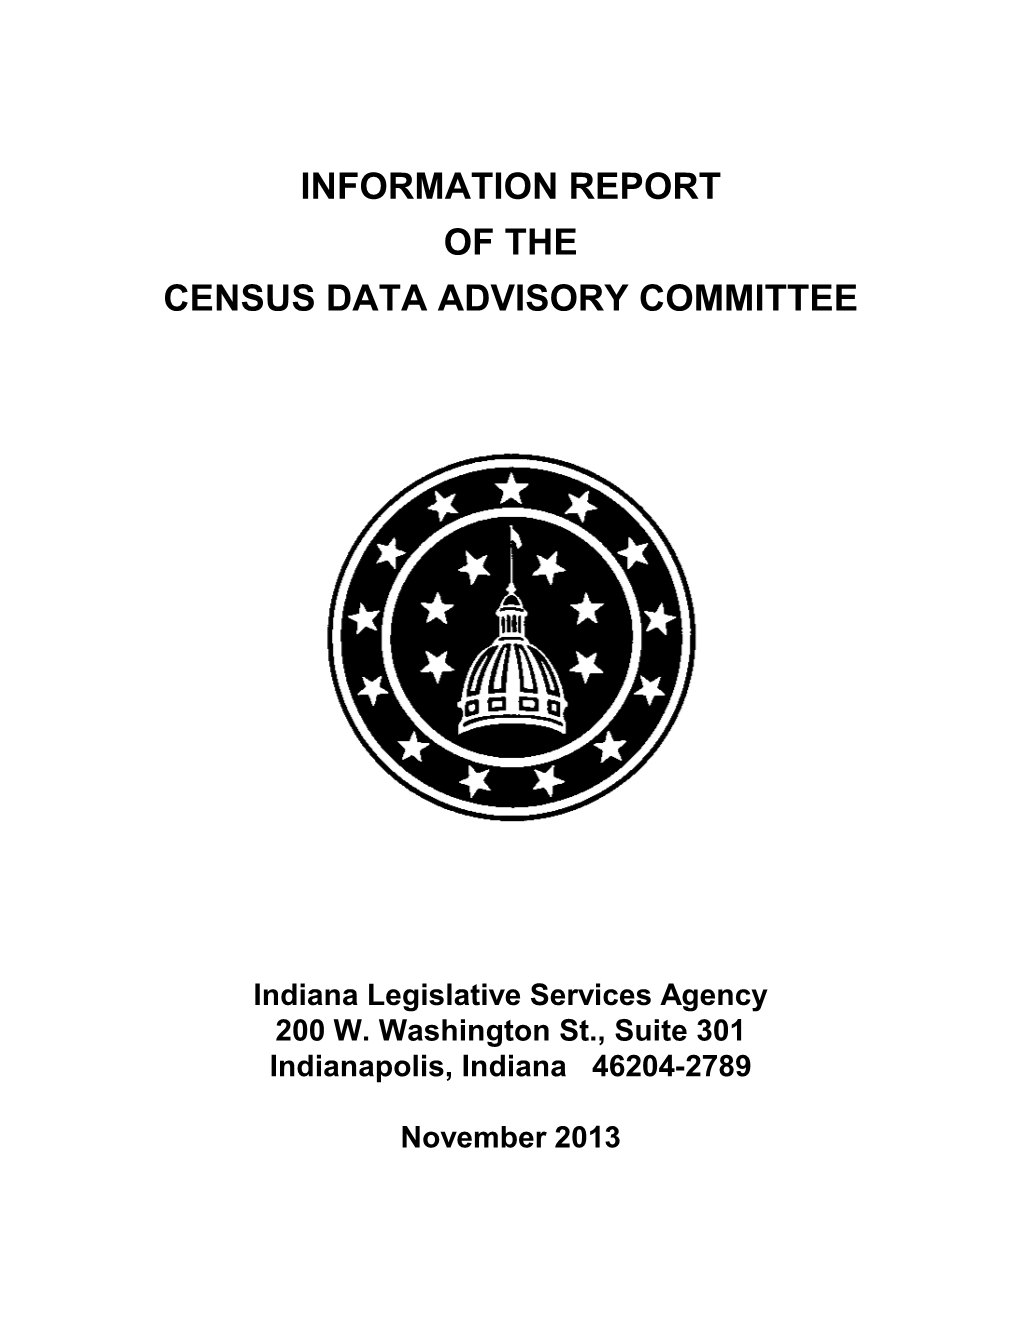 Information Report of the Census Data Advisory Committee